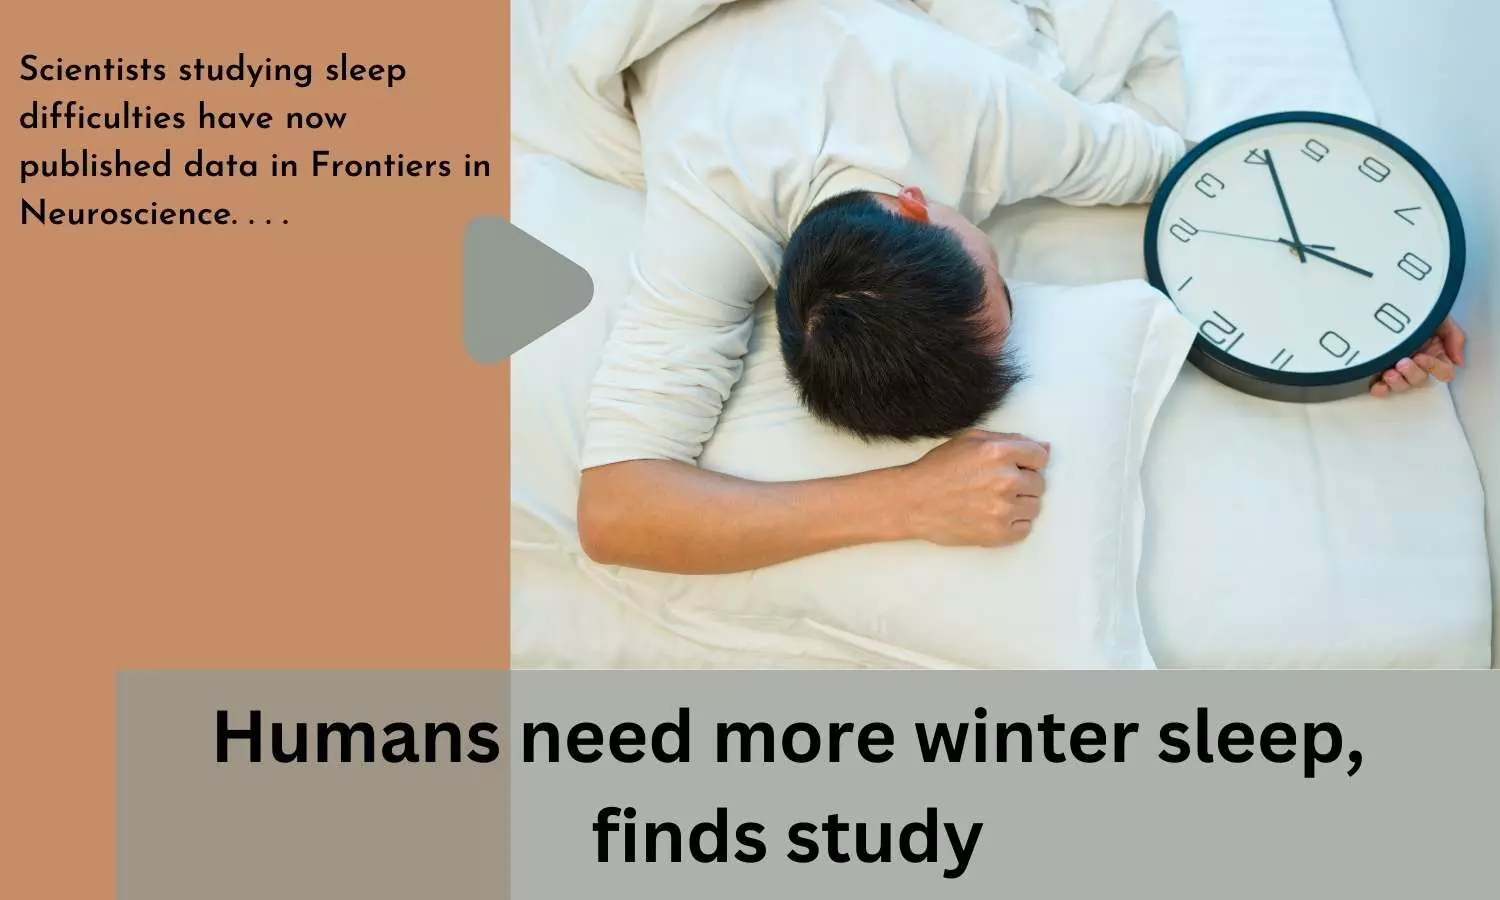 Humans need more winter sleep, finds study